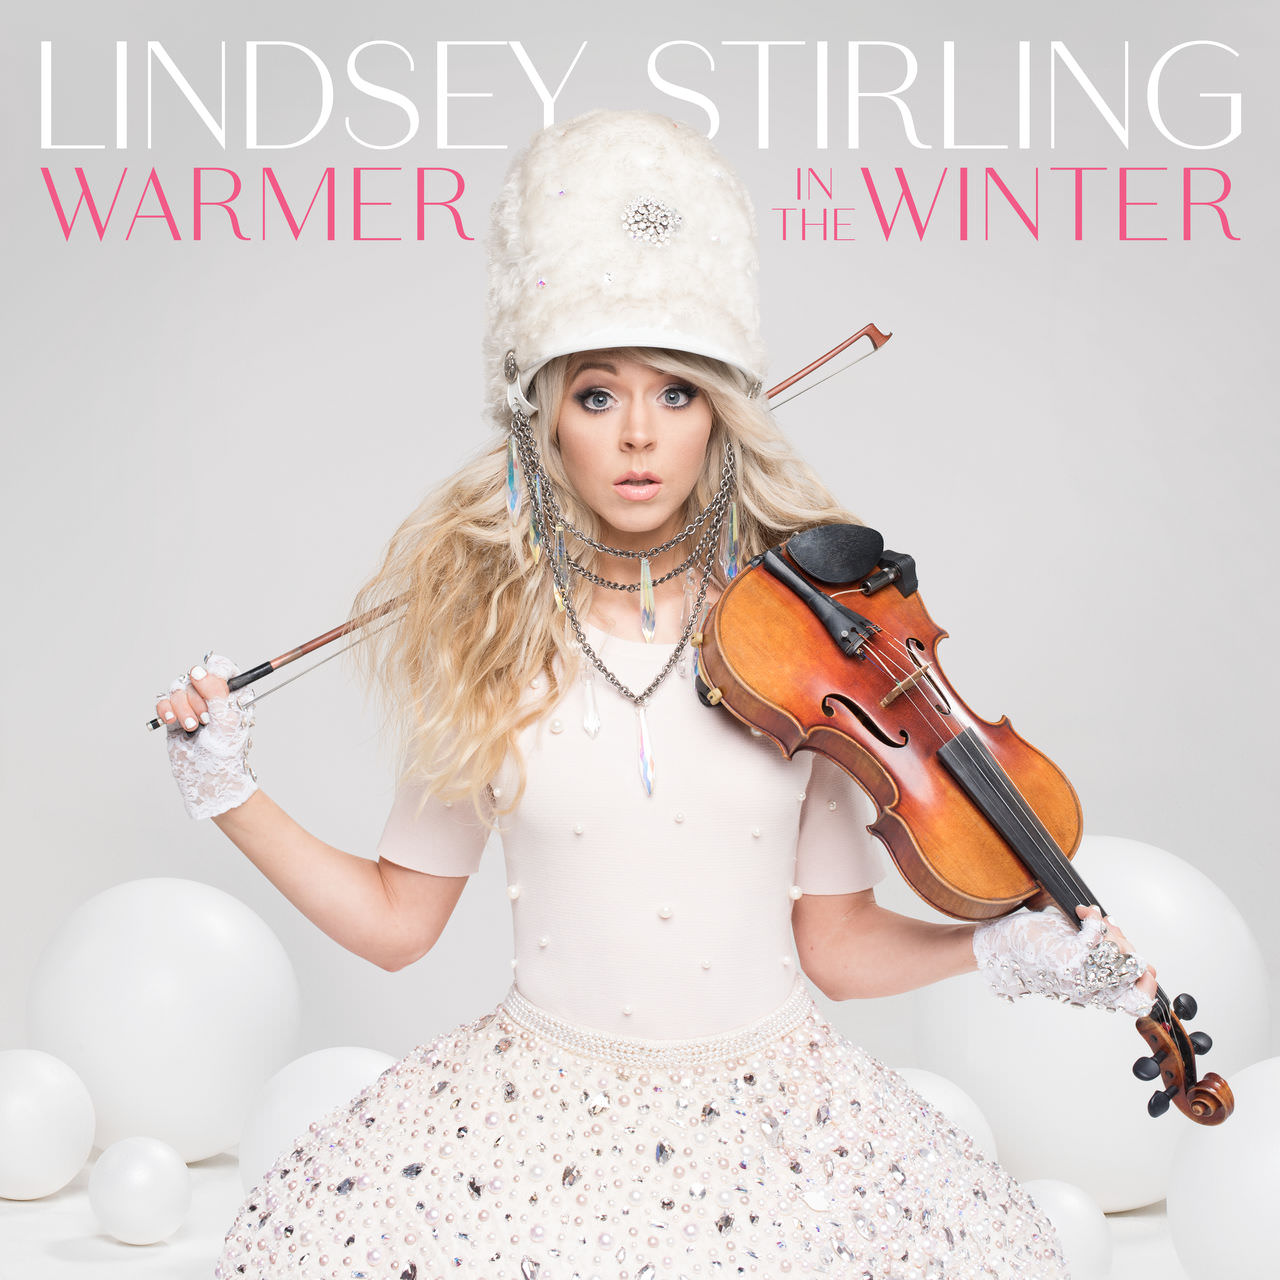 Lindsey Stirling – Warmer In The Winter {Deluxe Version} (2017) [Qobuz FLAC 24bit/48kHz]